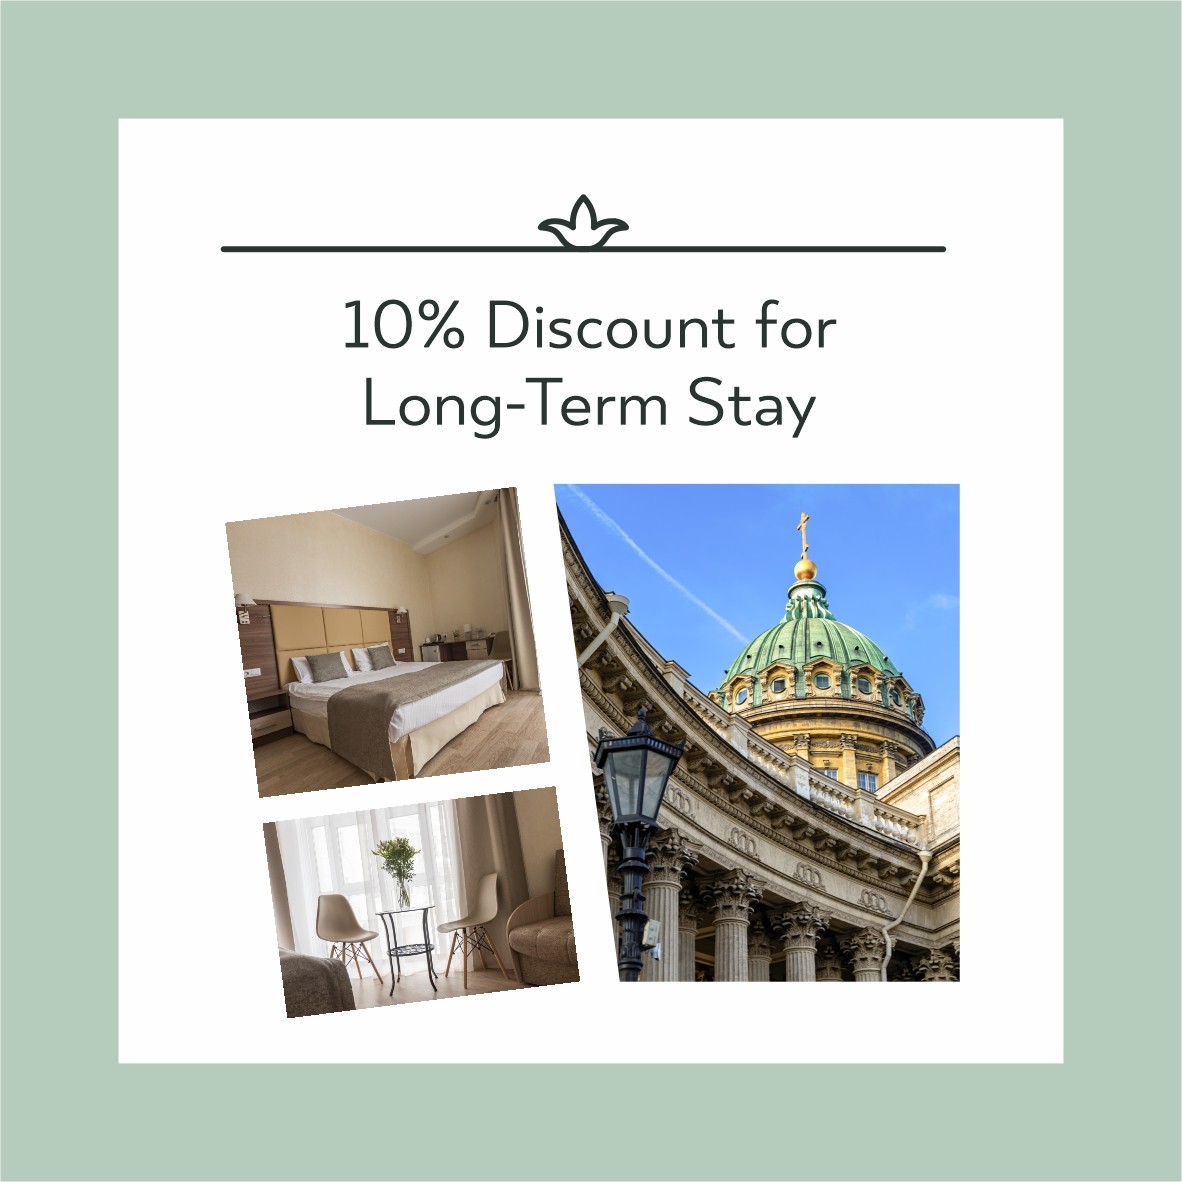 10% Discount for Long-Term Stay